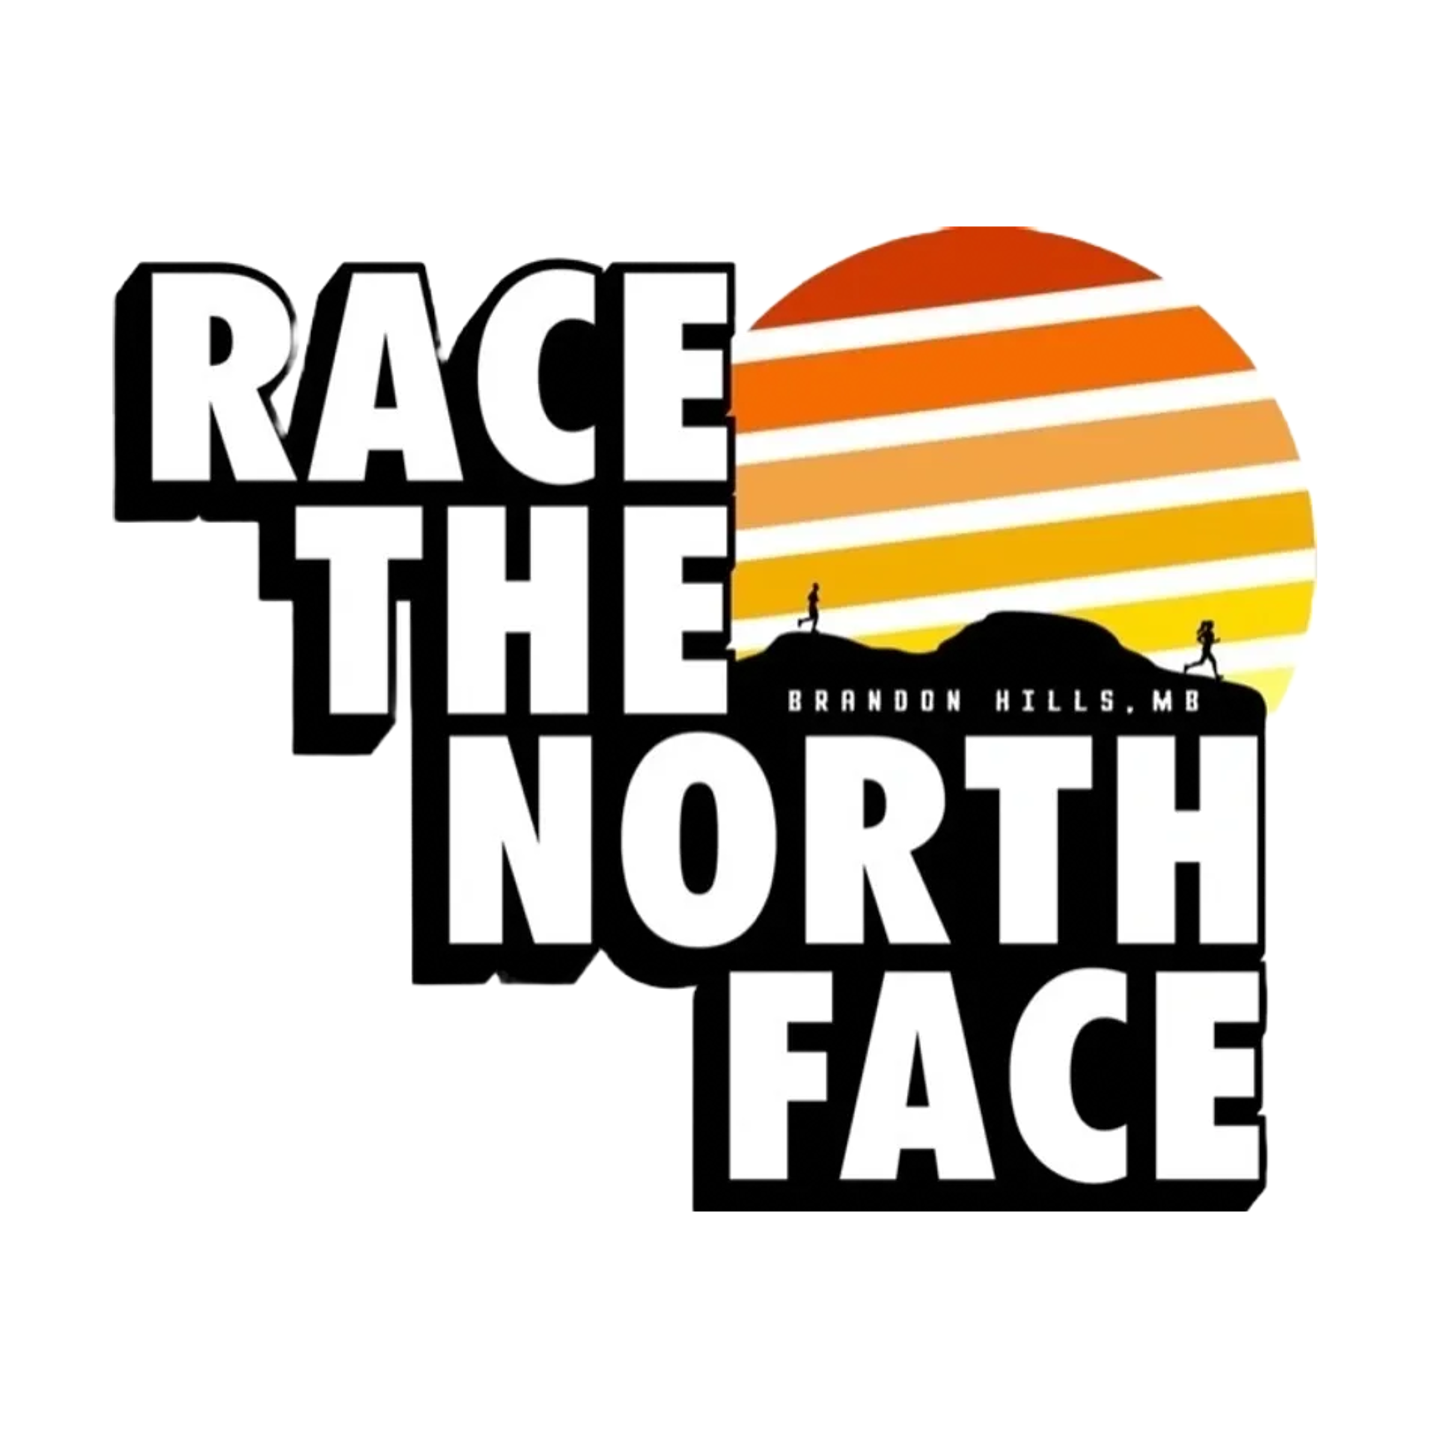 Race-the-North-Face